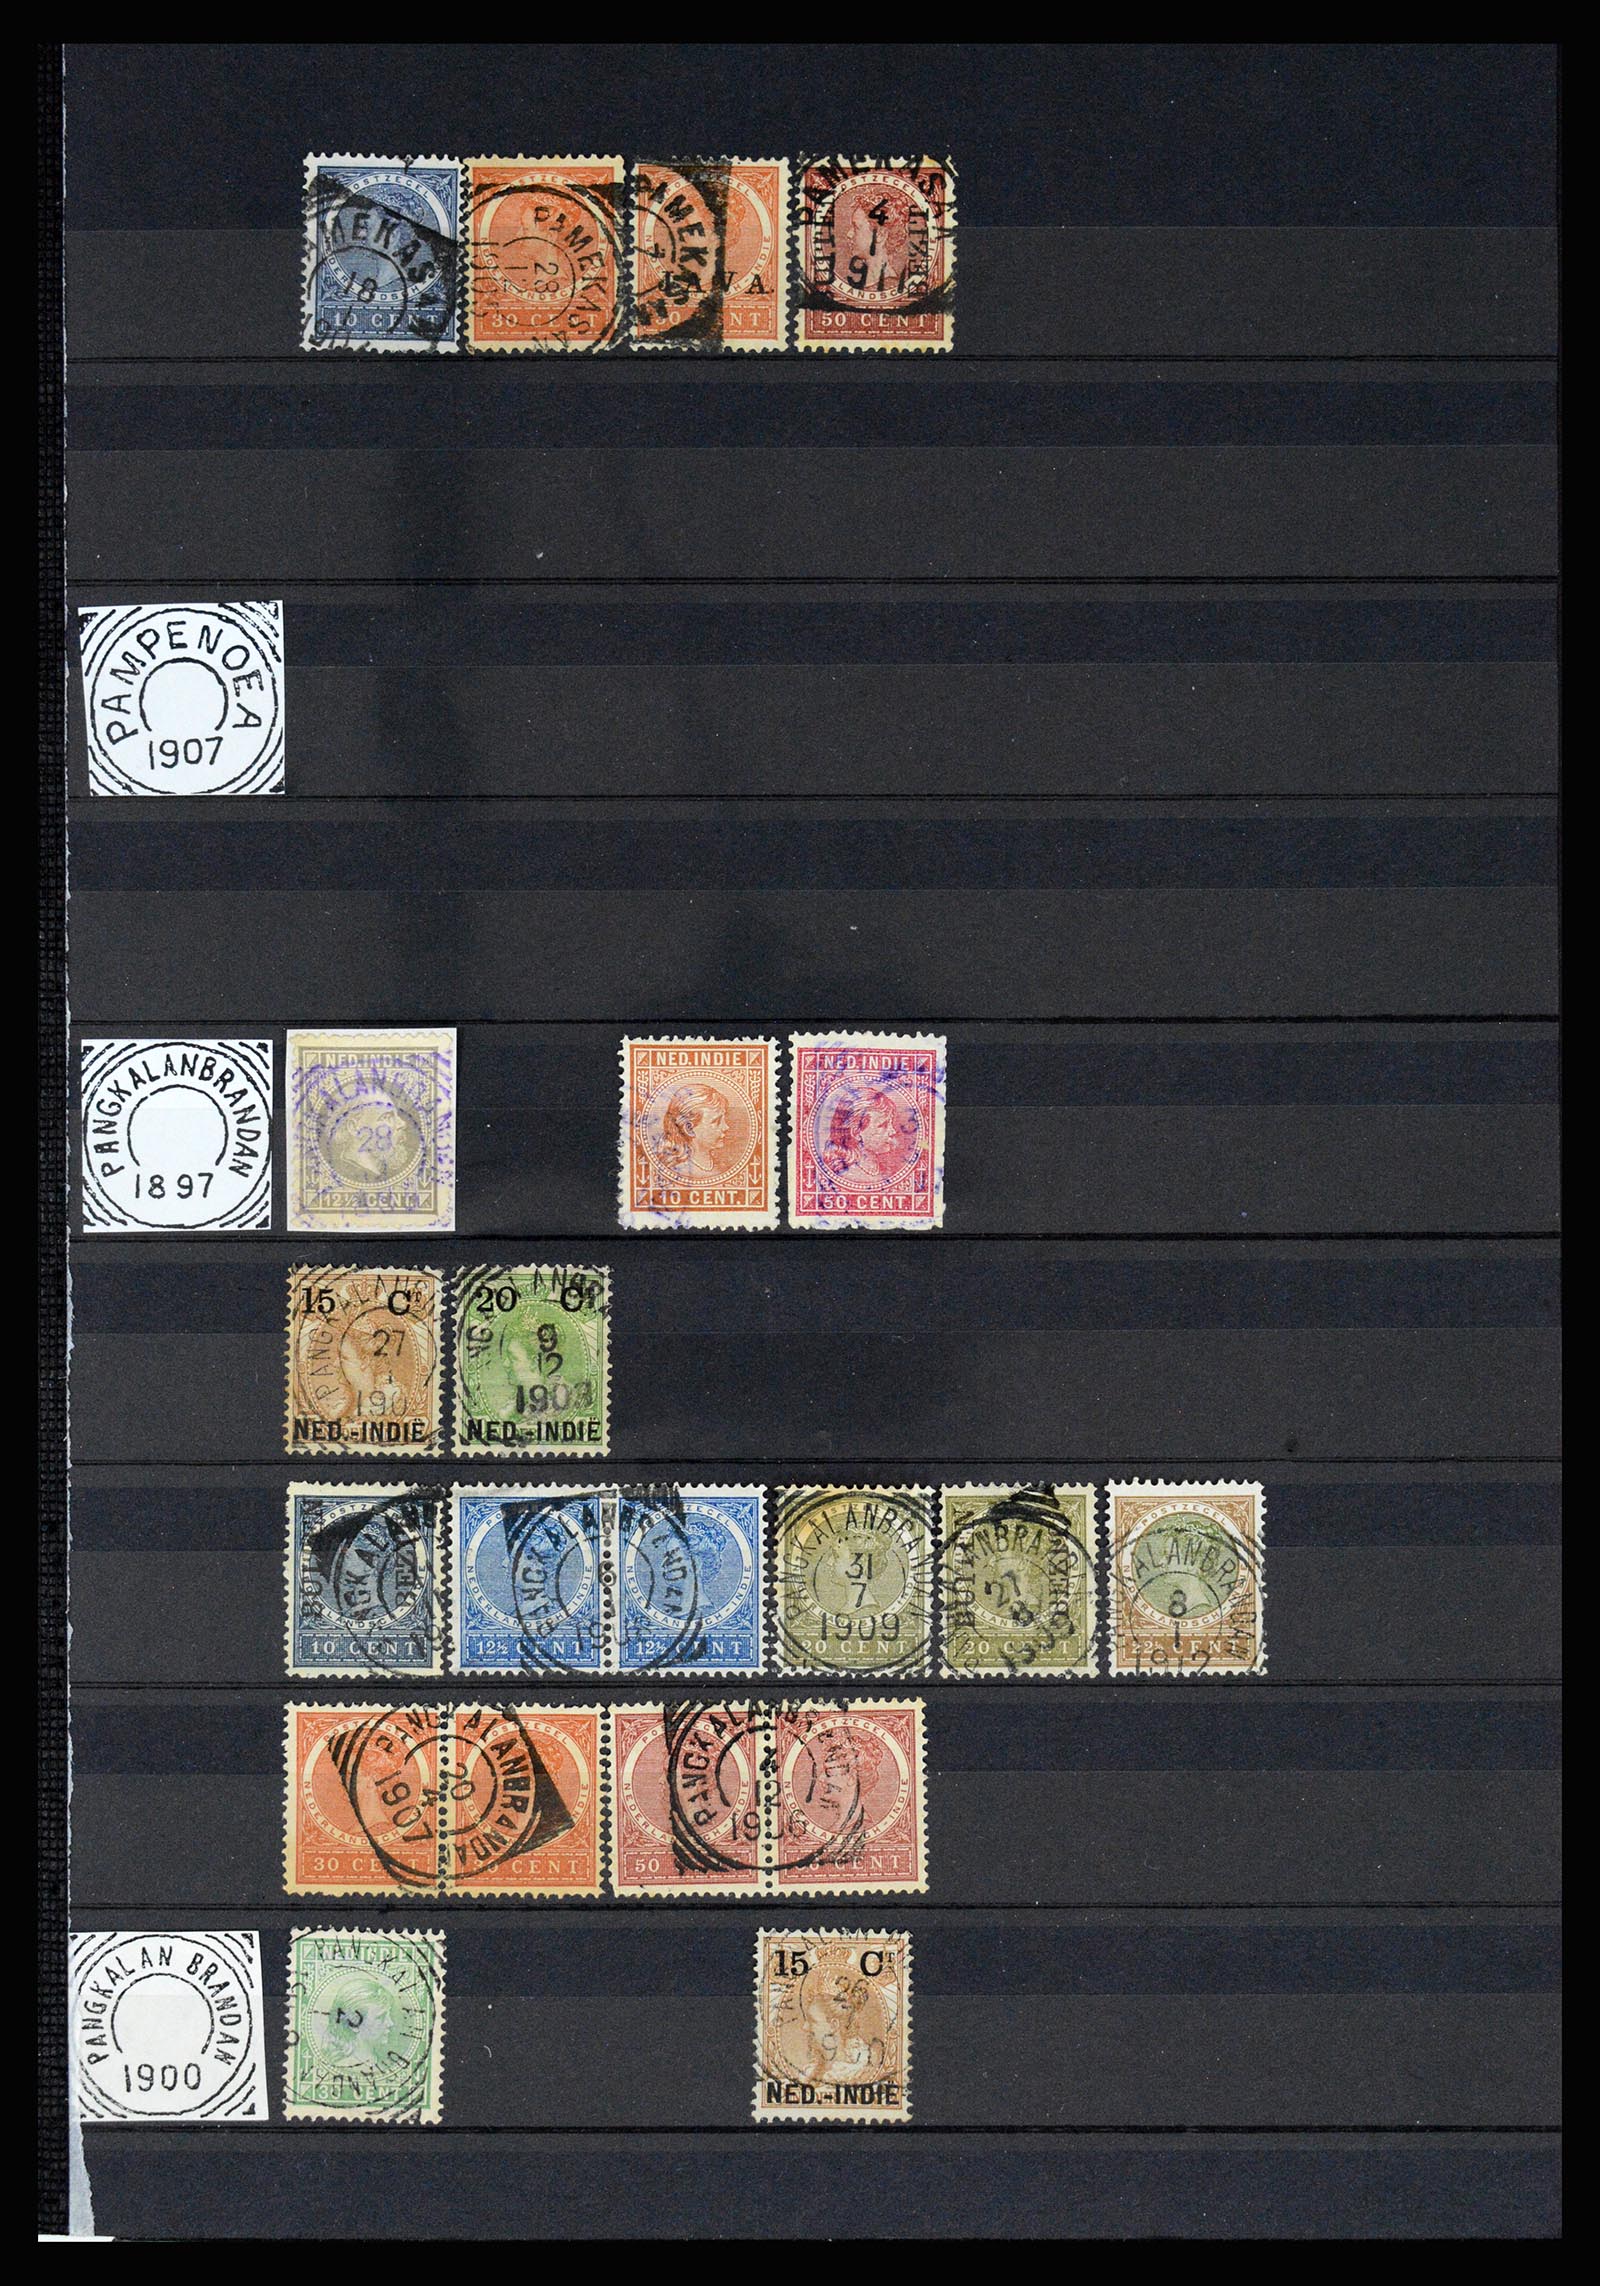 36839 036 - Stamp collection 36839 Dutch east Indies square cancels.